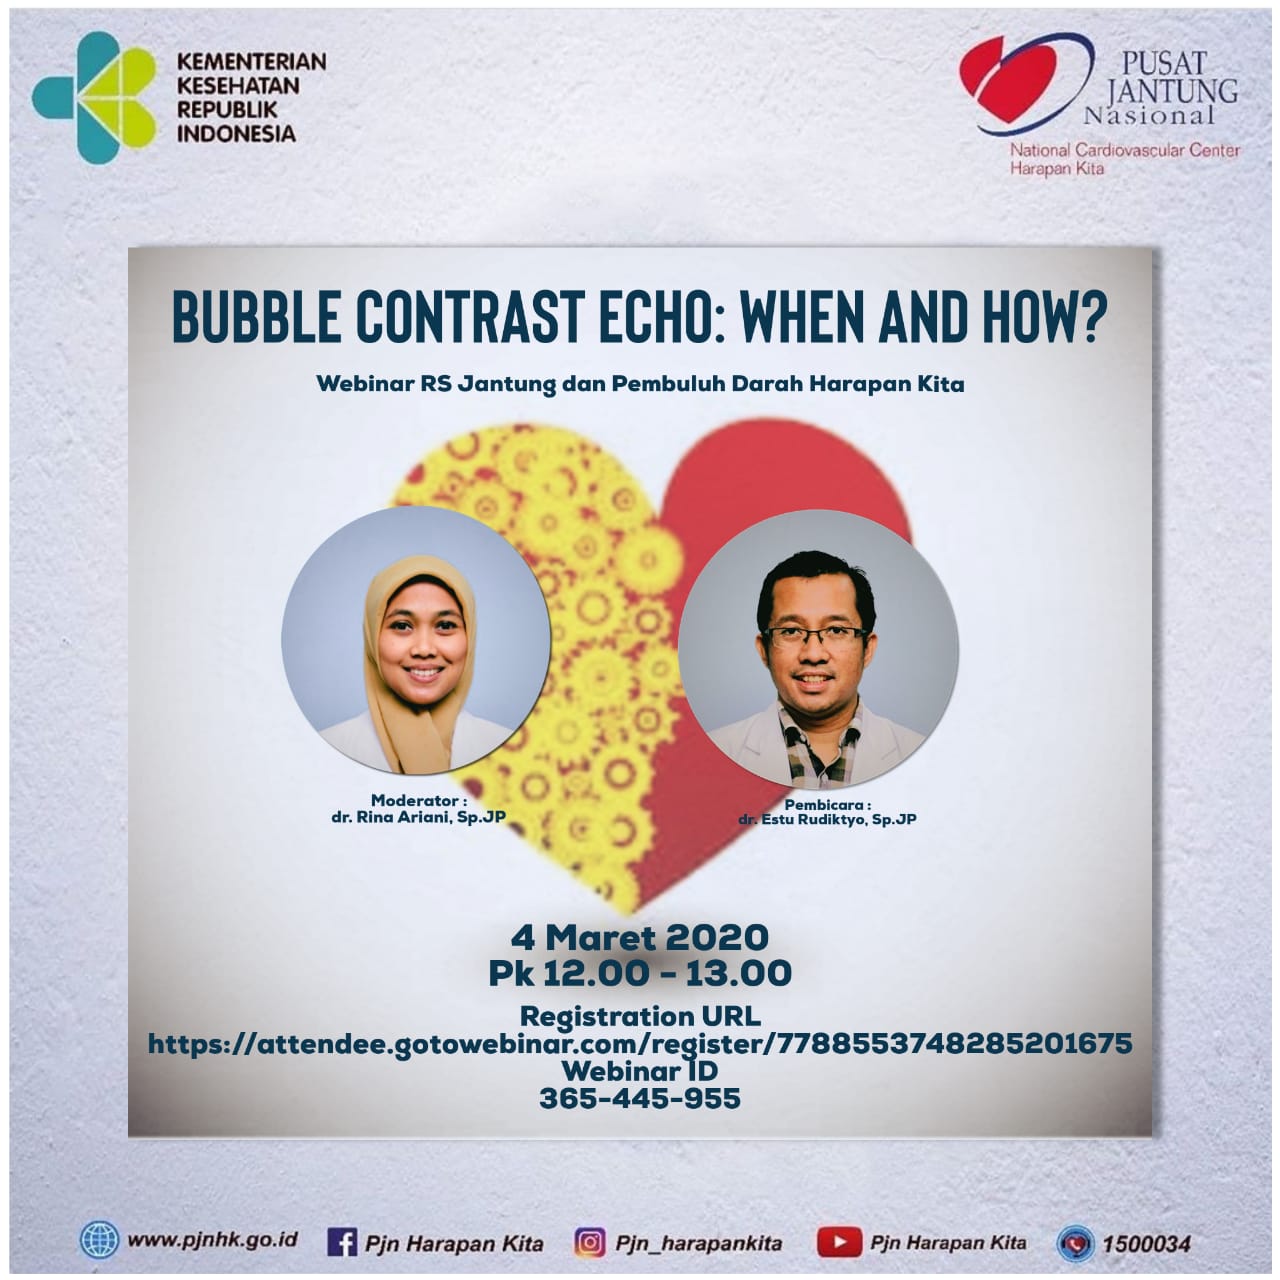 Webinar "Bubble Contrast Echo: When and How"